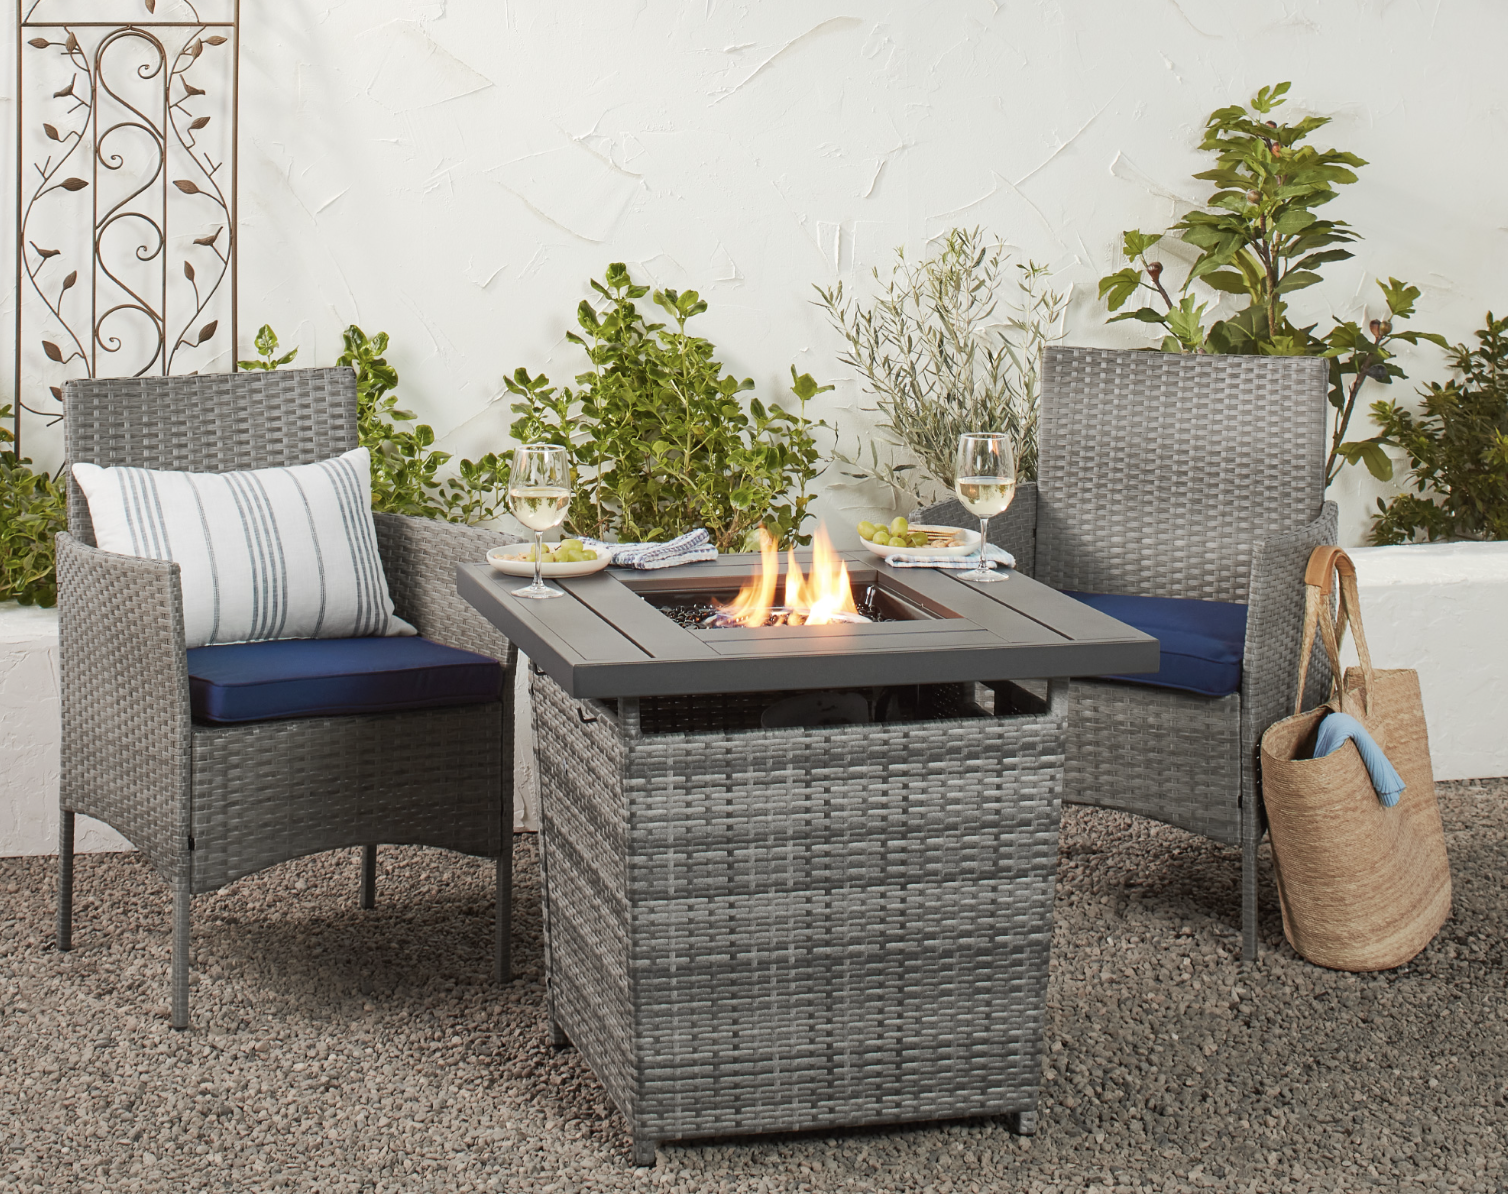 the fire pit on a patio with chairs around it